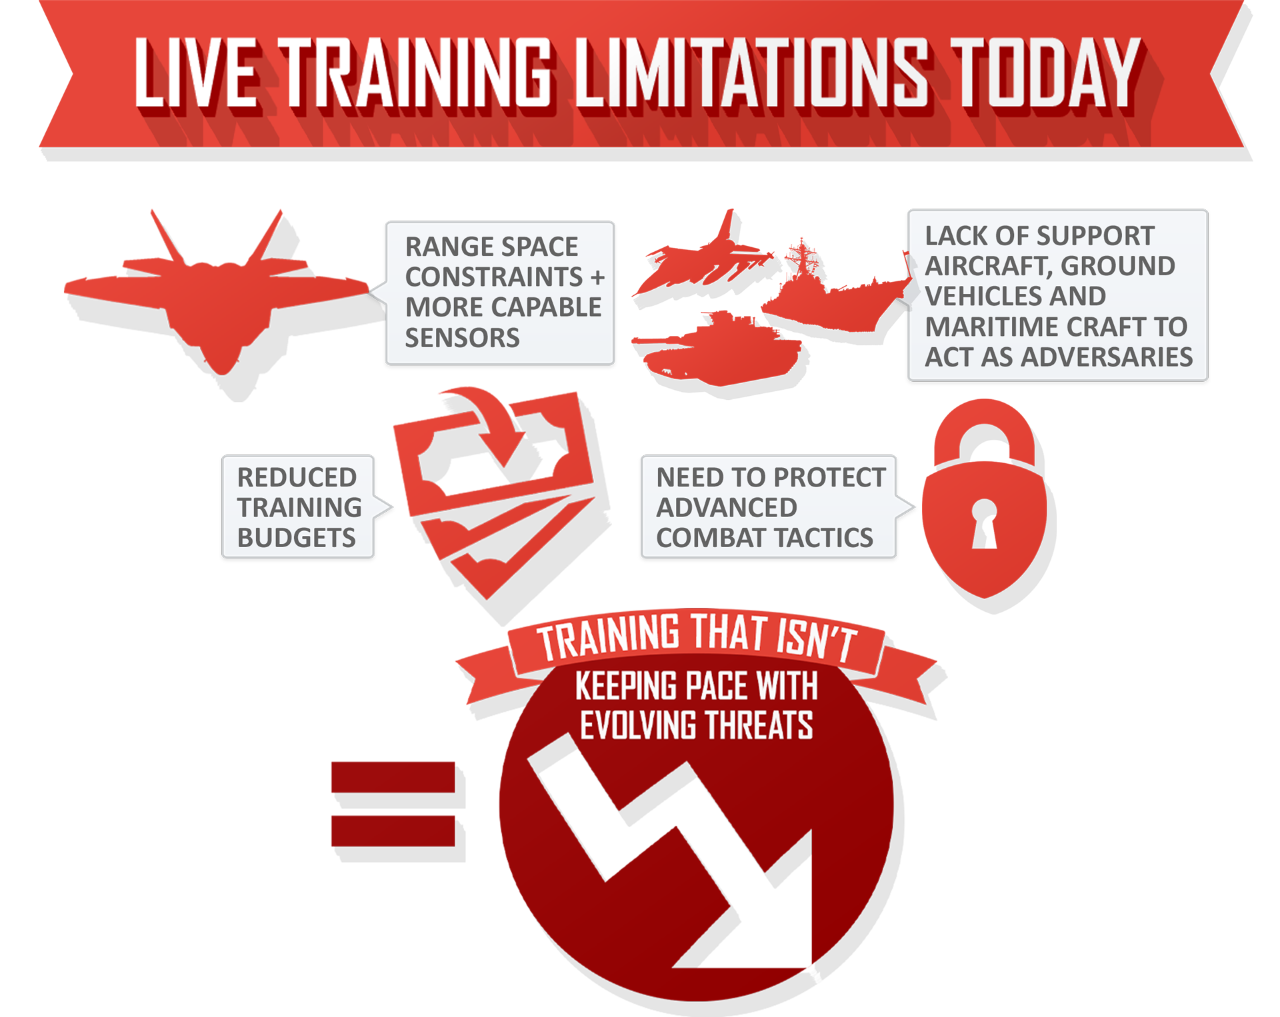 Live Training Limitations Today